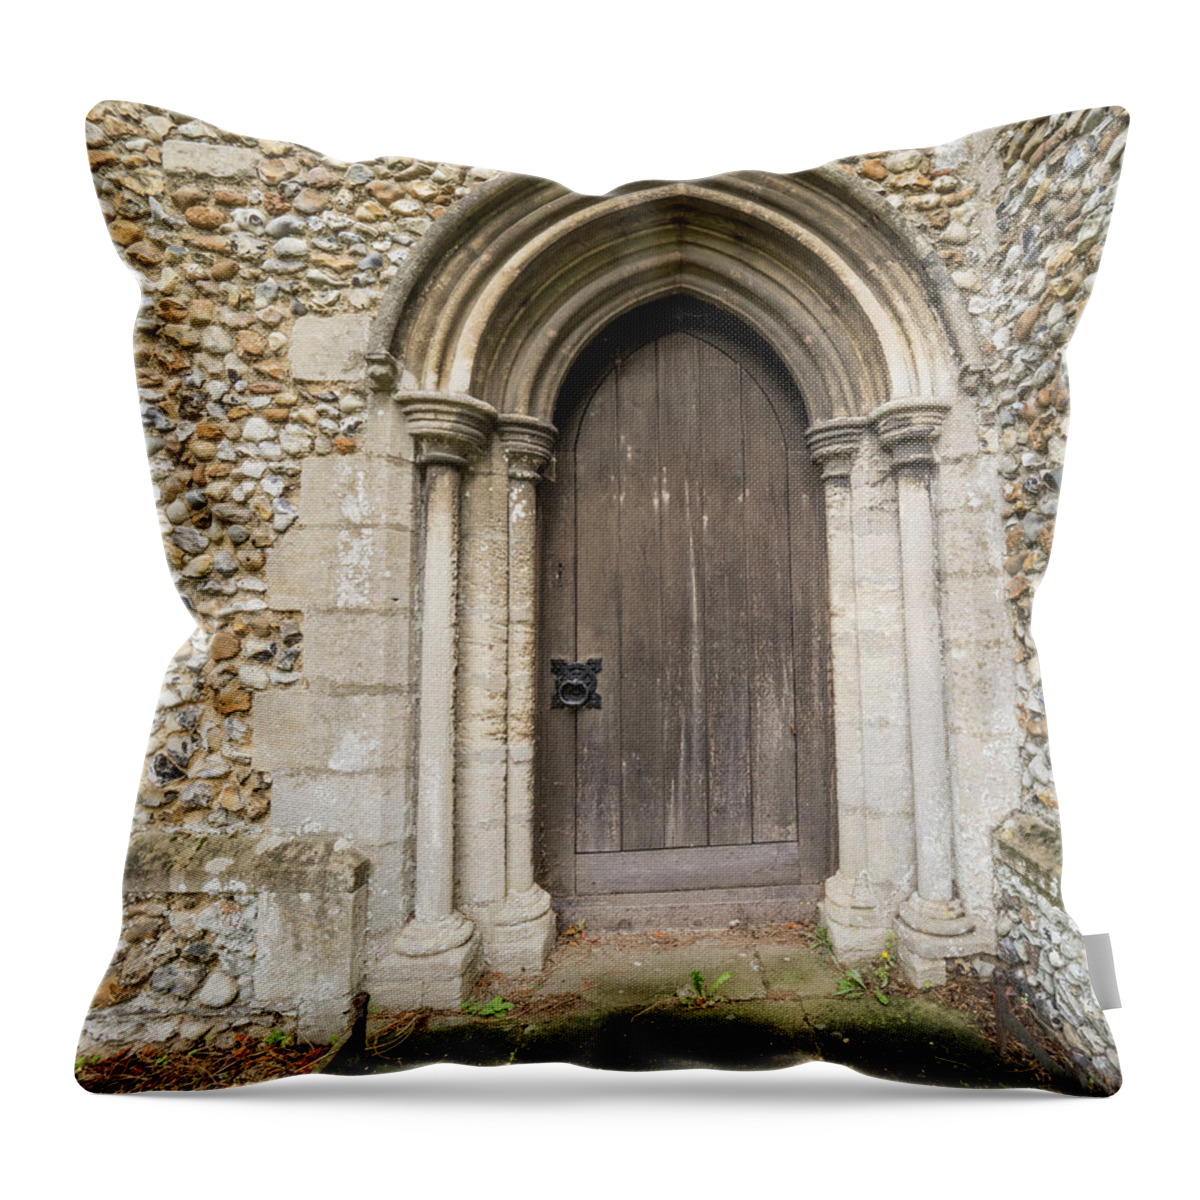 Jean Noren Throw Pillow featuring the photograph Arched Doorway by Jean Noren